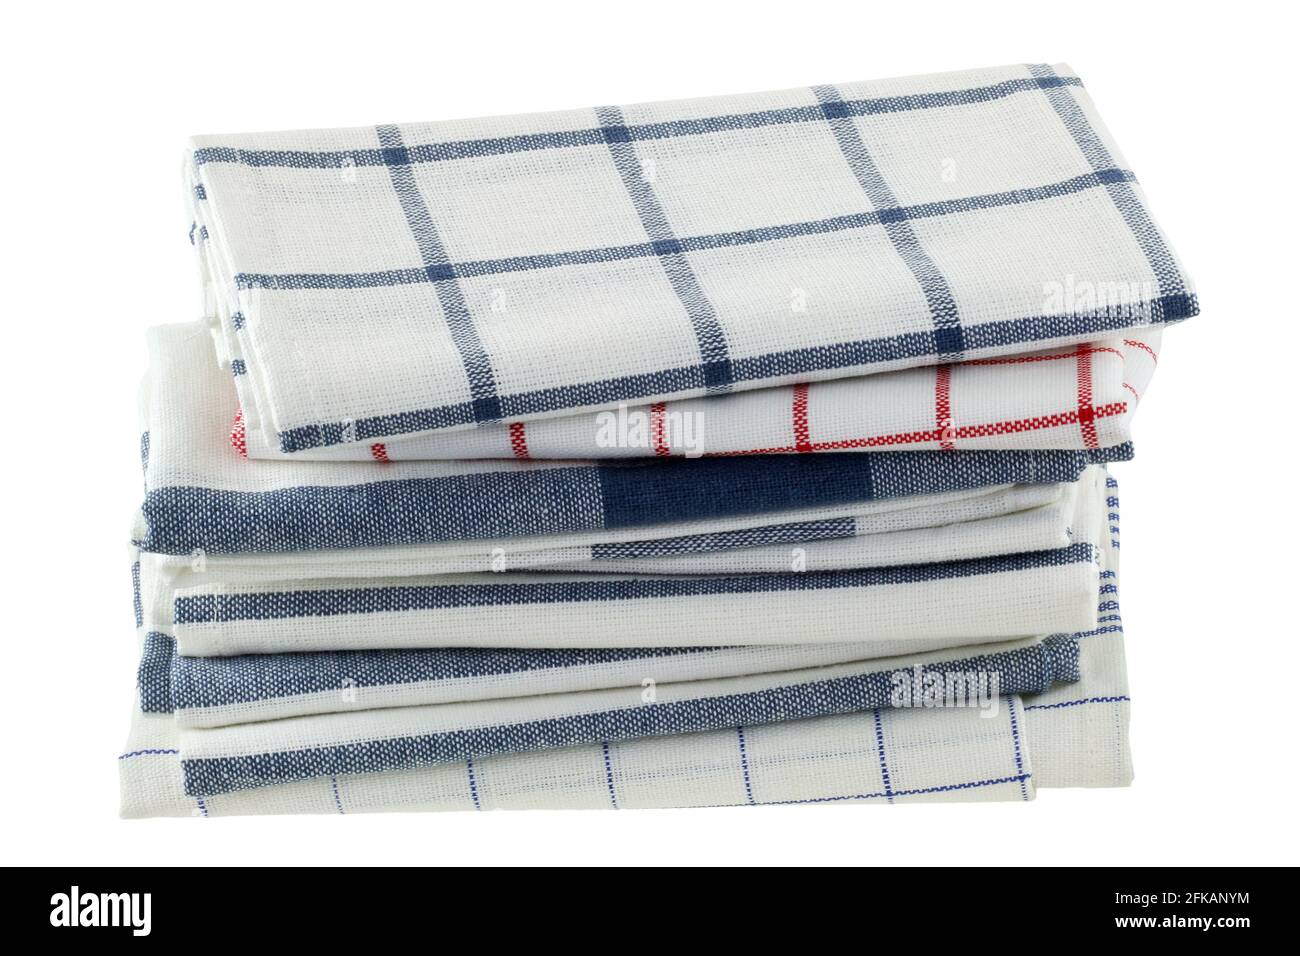 https://c8.alamy.com/comp/2FKANYM/folded-kitchen-towels-in-different-patterns-isolated-on-white-2FKANYM.jpg